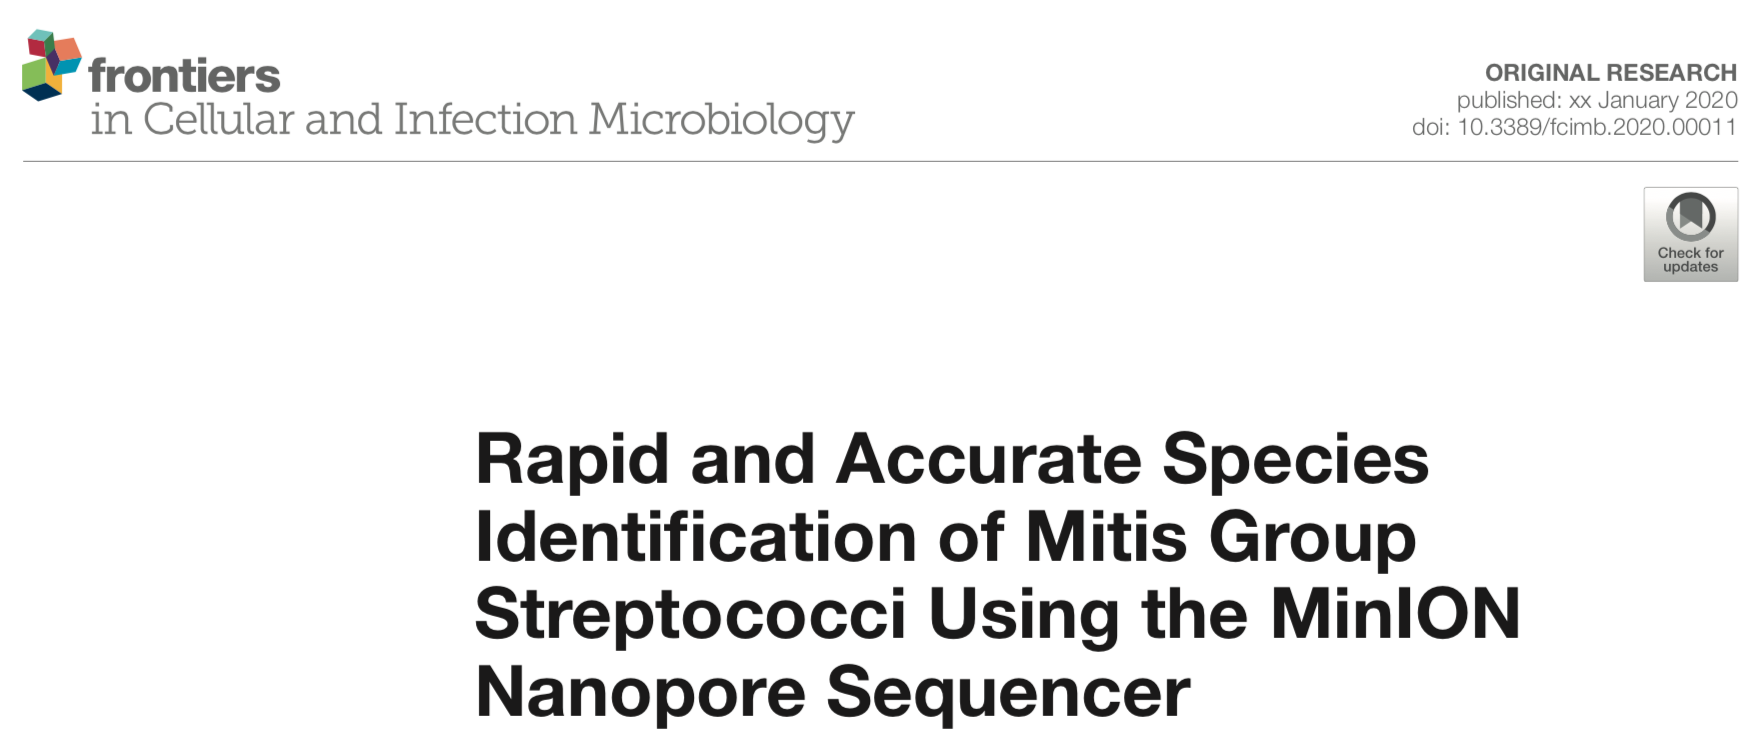 The original article reported by Dr. Imai was accepted in Frontiers in Cellular and Infection Microbiology!